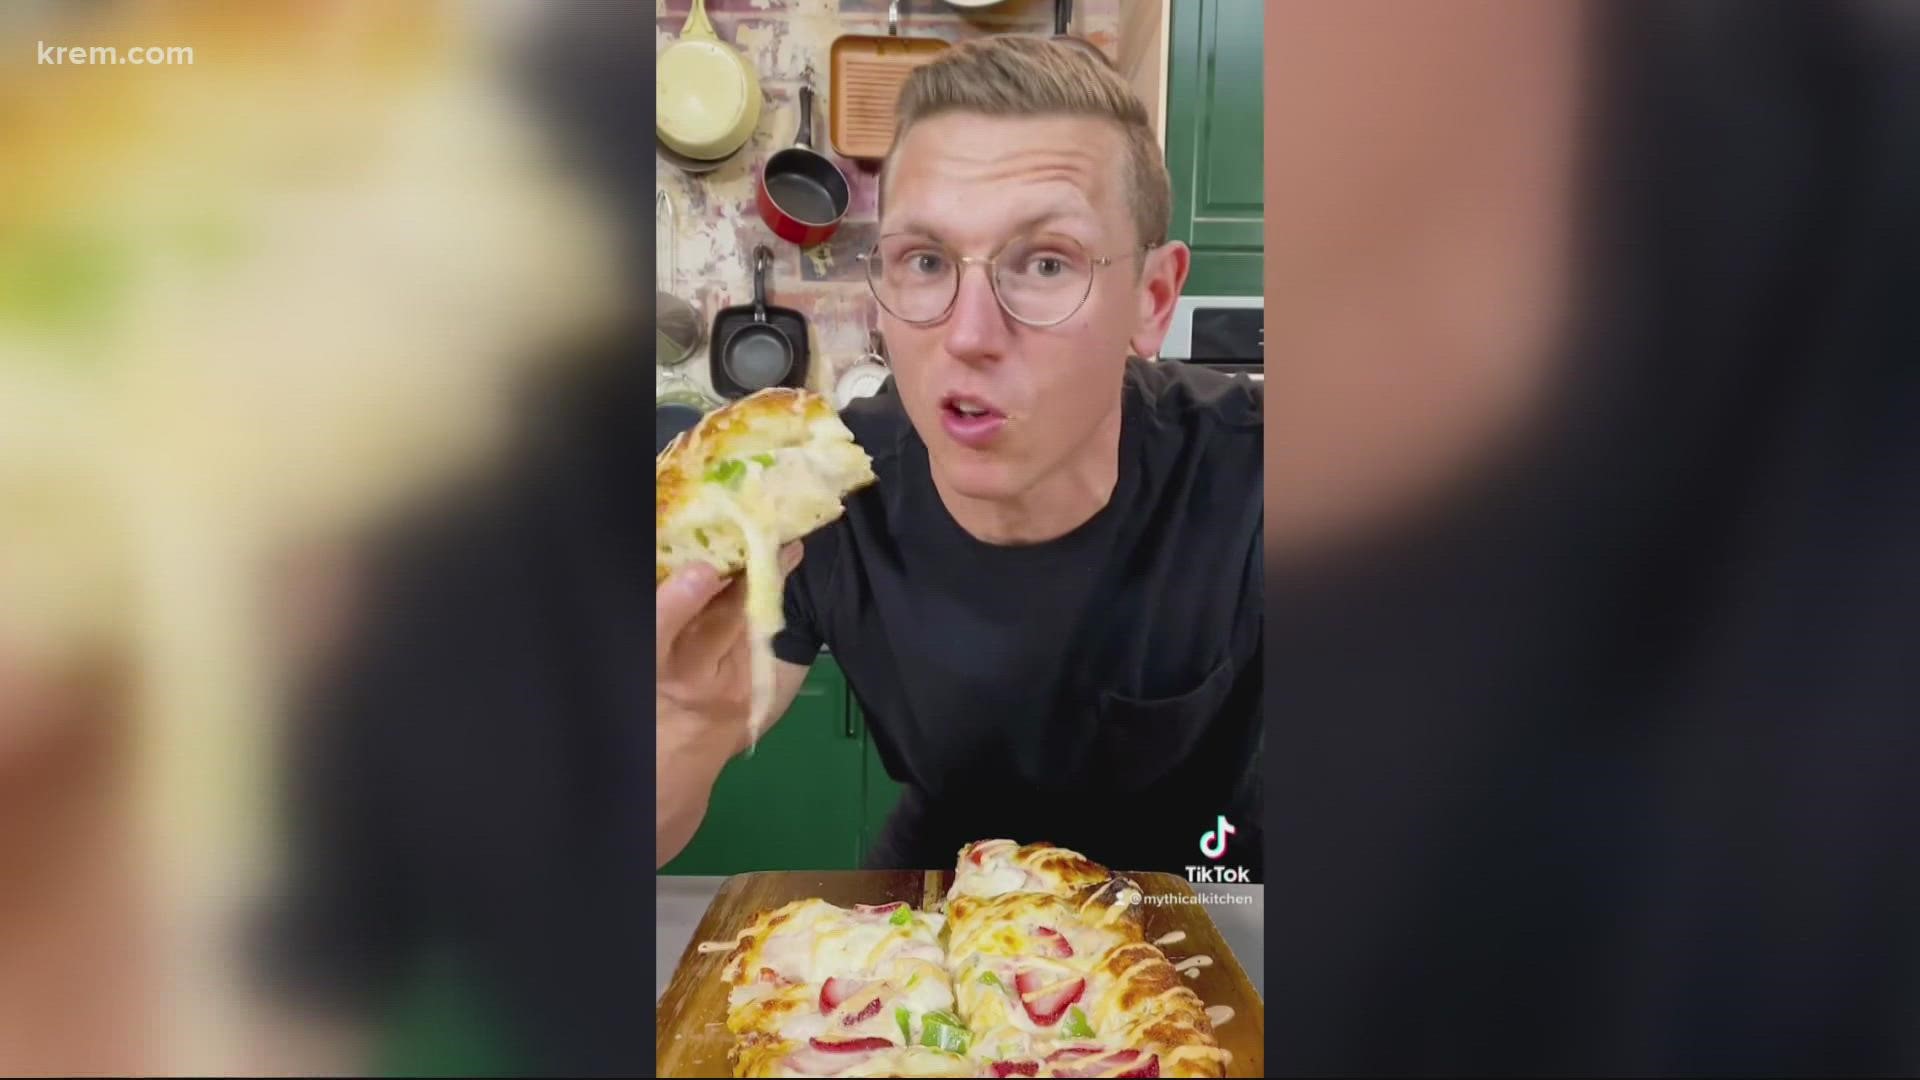 Fry sauce, canned salmon and strawberries are some of the ingredients that Tiktoker Josh Scherer used to cook the pizza recipe that has locals waiting to try it.